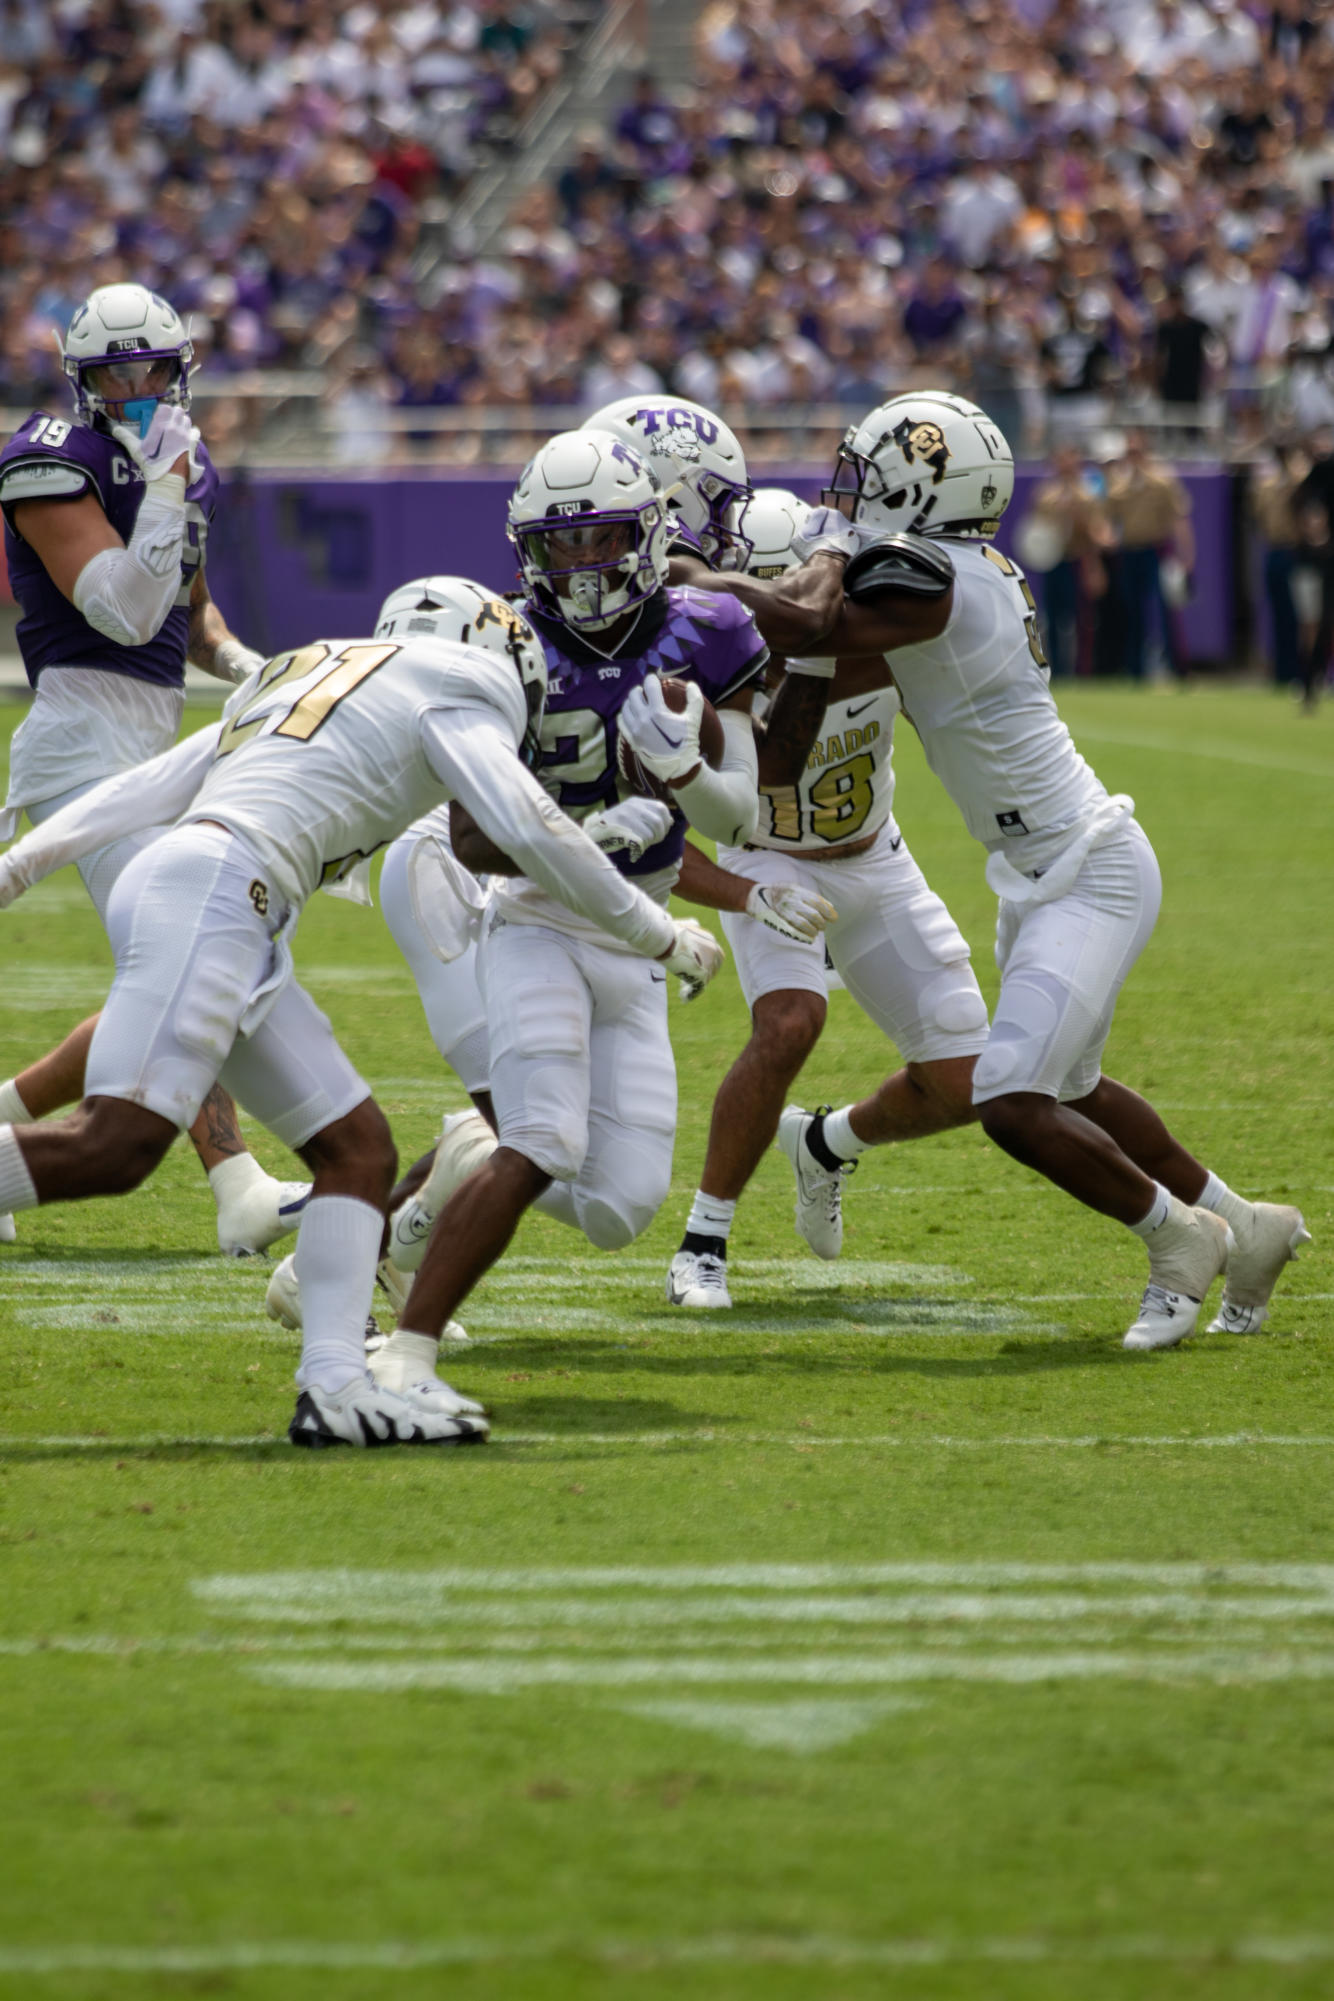 Trey+Sanders+3+touchdowns+not+enough+as+TCU+falls+to+Colorado+in+home+opener